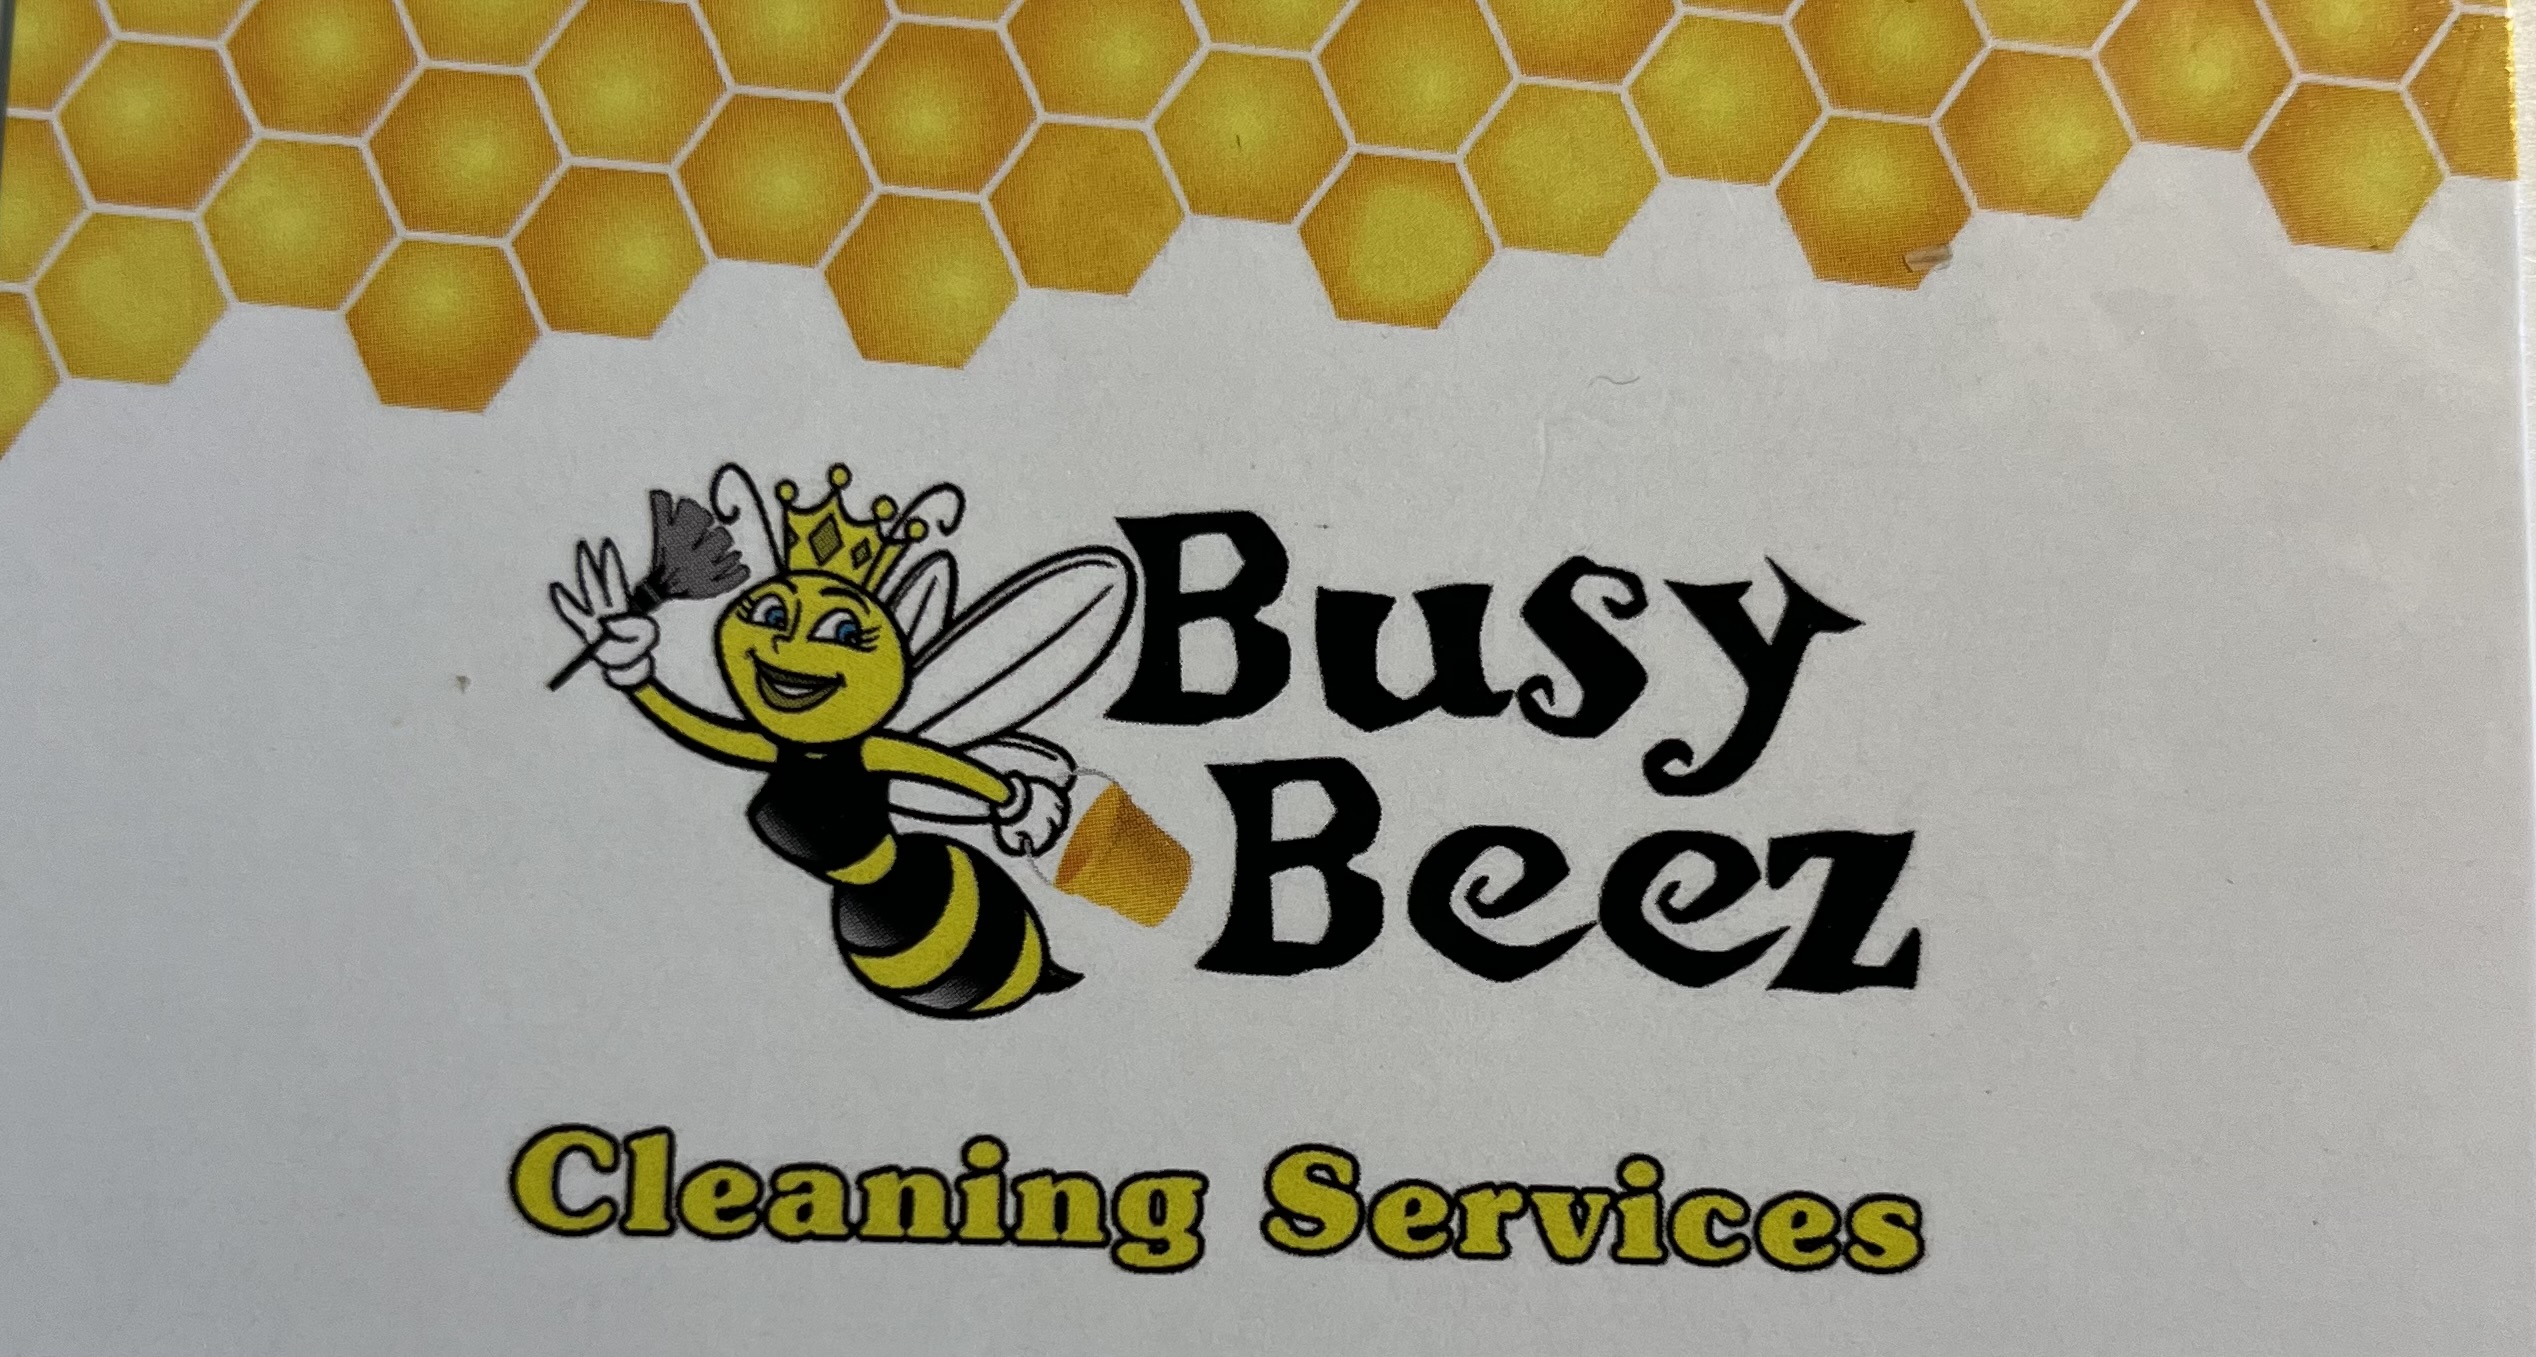 Busy Beez Cleaning Services Logo